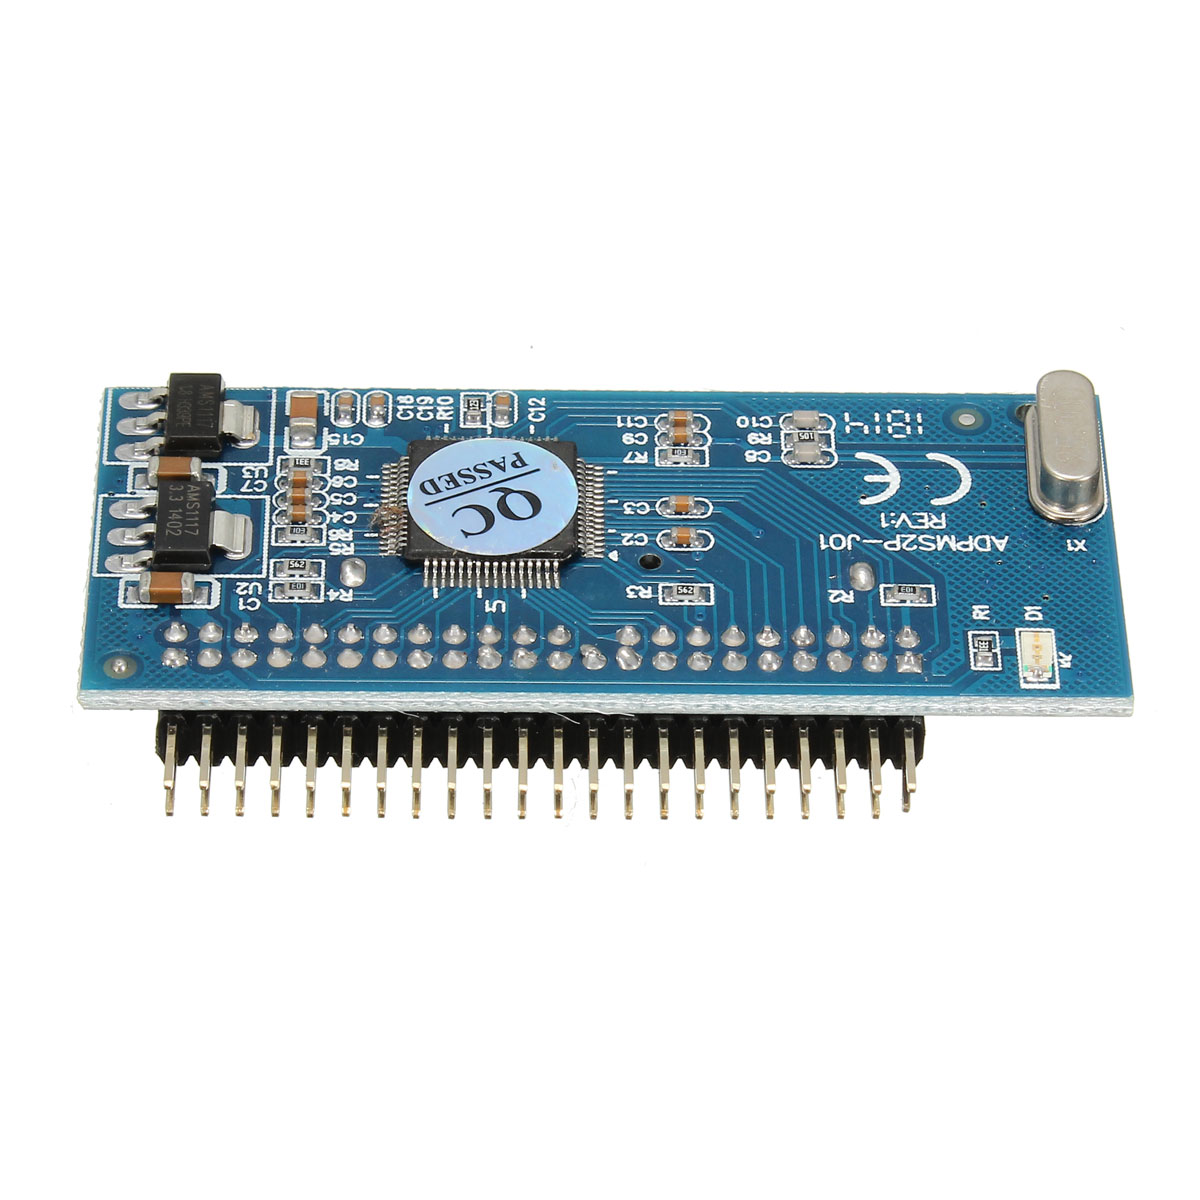 Find 1 8 Micro SATA 16 Pin Female To IDE 44 Pin PCB Adapter Hard Drive Converter for Sale on Gipsybee.com with cryptocurrencies